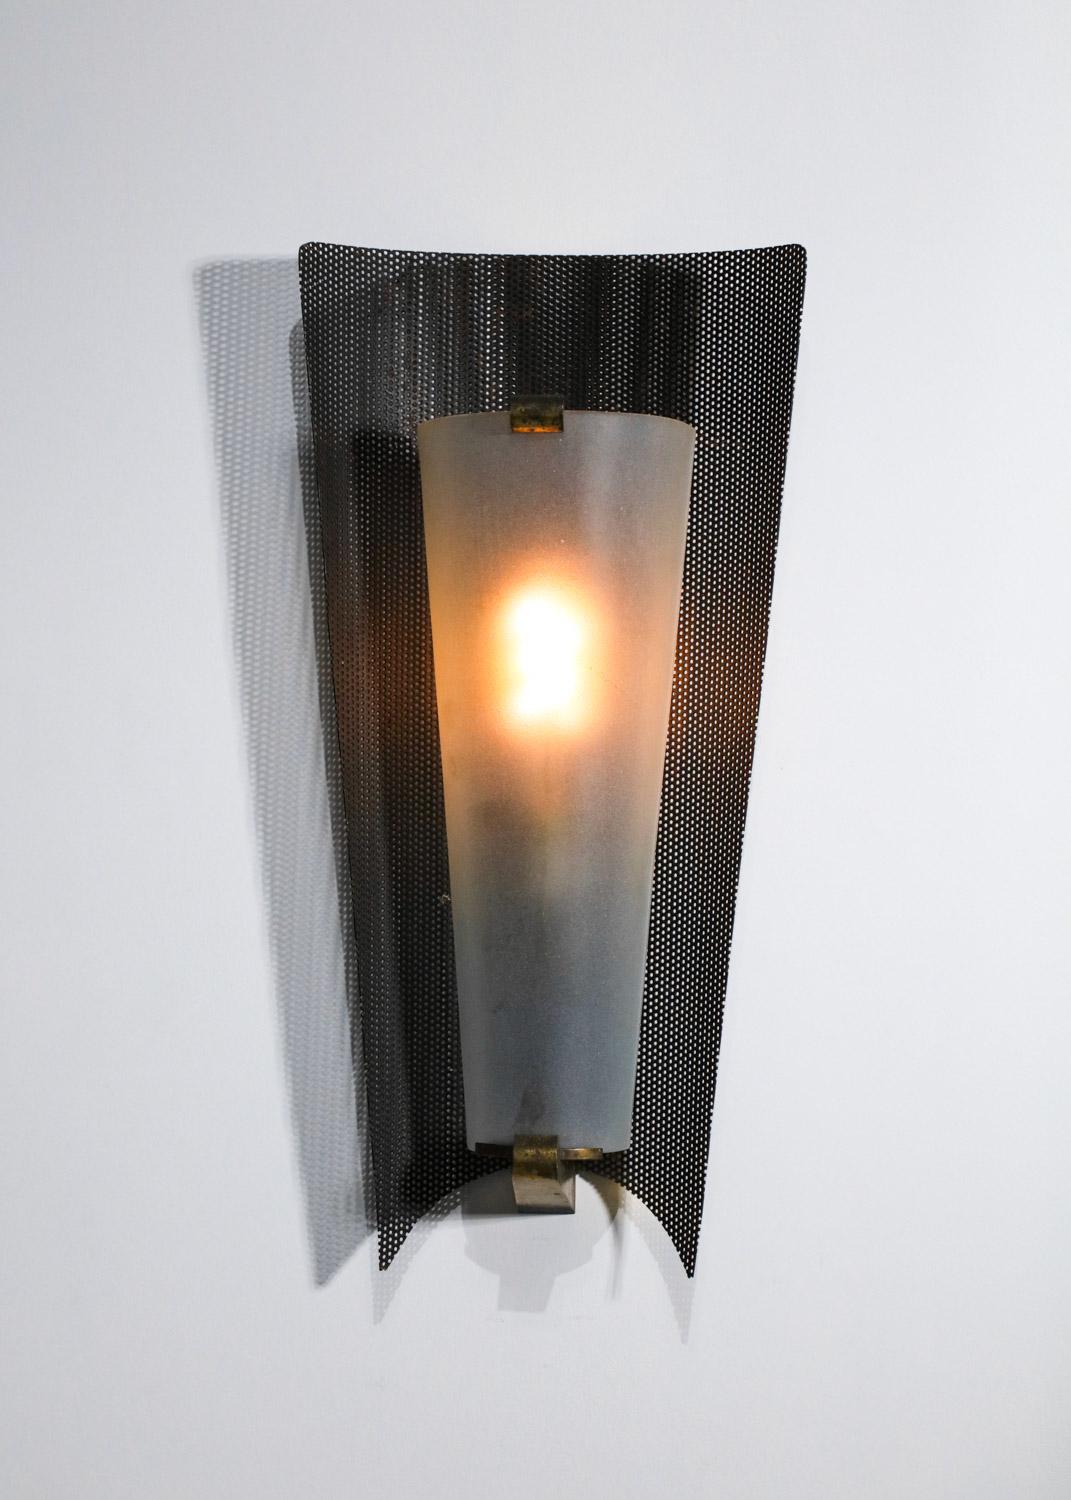 Lacquered Large French Wall Light 50's Style Mathieu Mategot in Rigitulle and Glass, G851